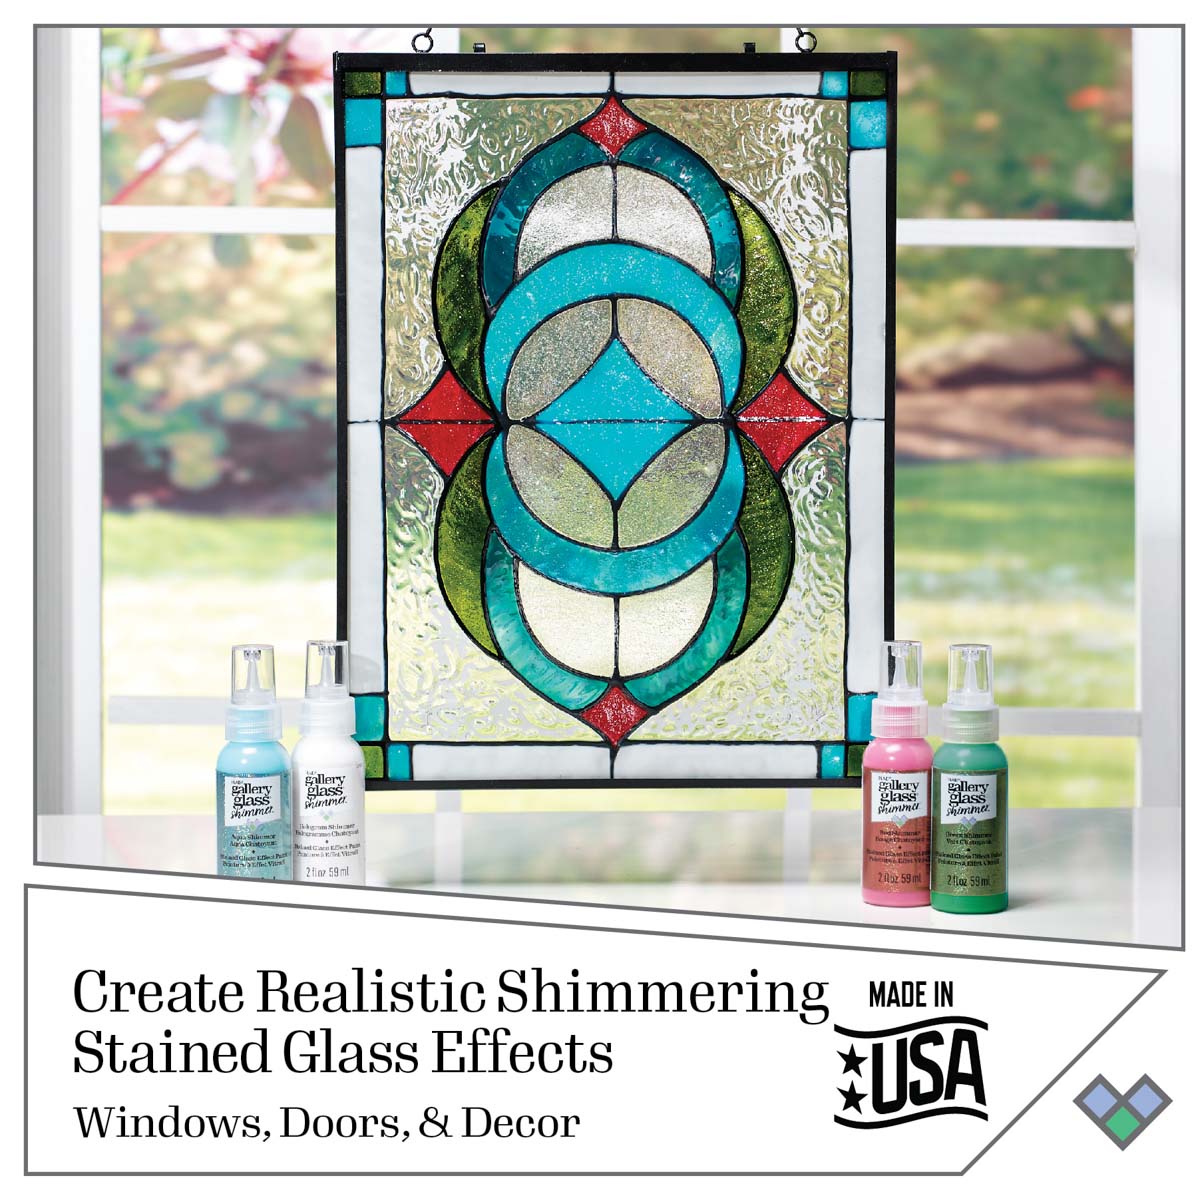 Shop Plaid Gallery Glass ® Stained Glass Confetti Paint - Berry, 2 oz. -  19675 - 19675